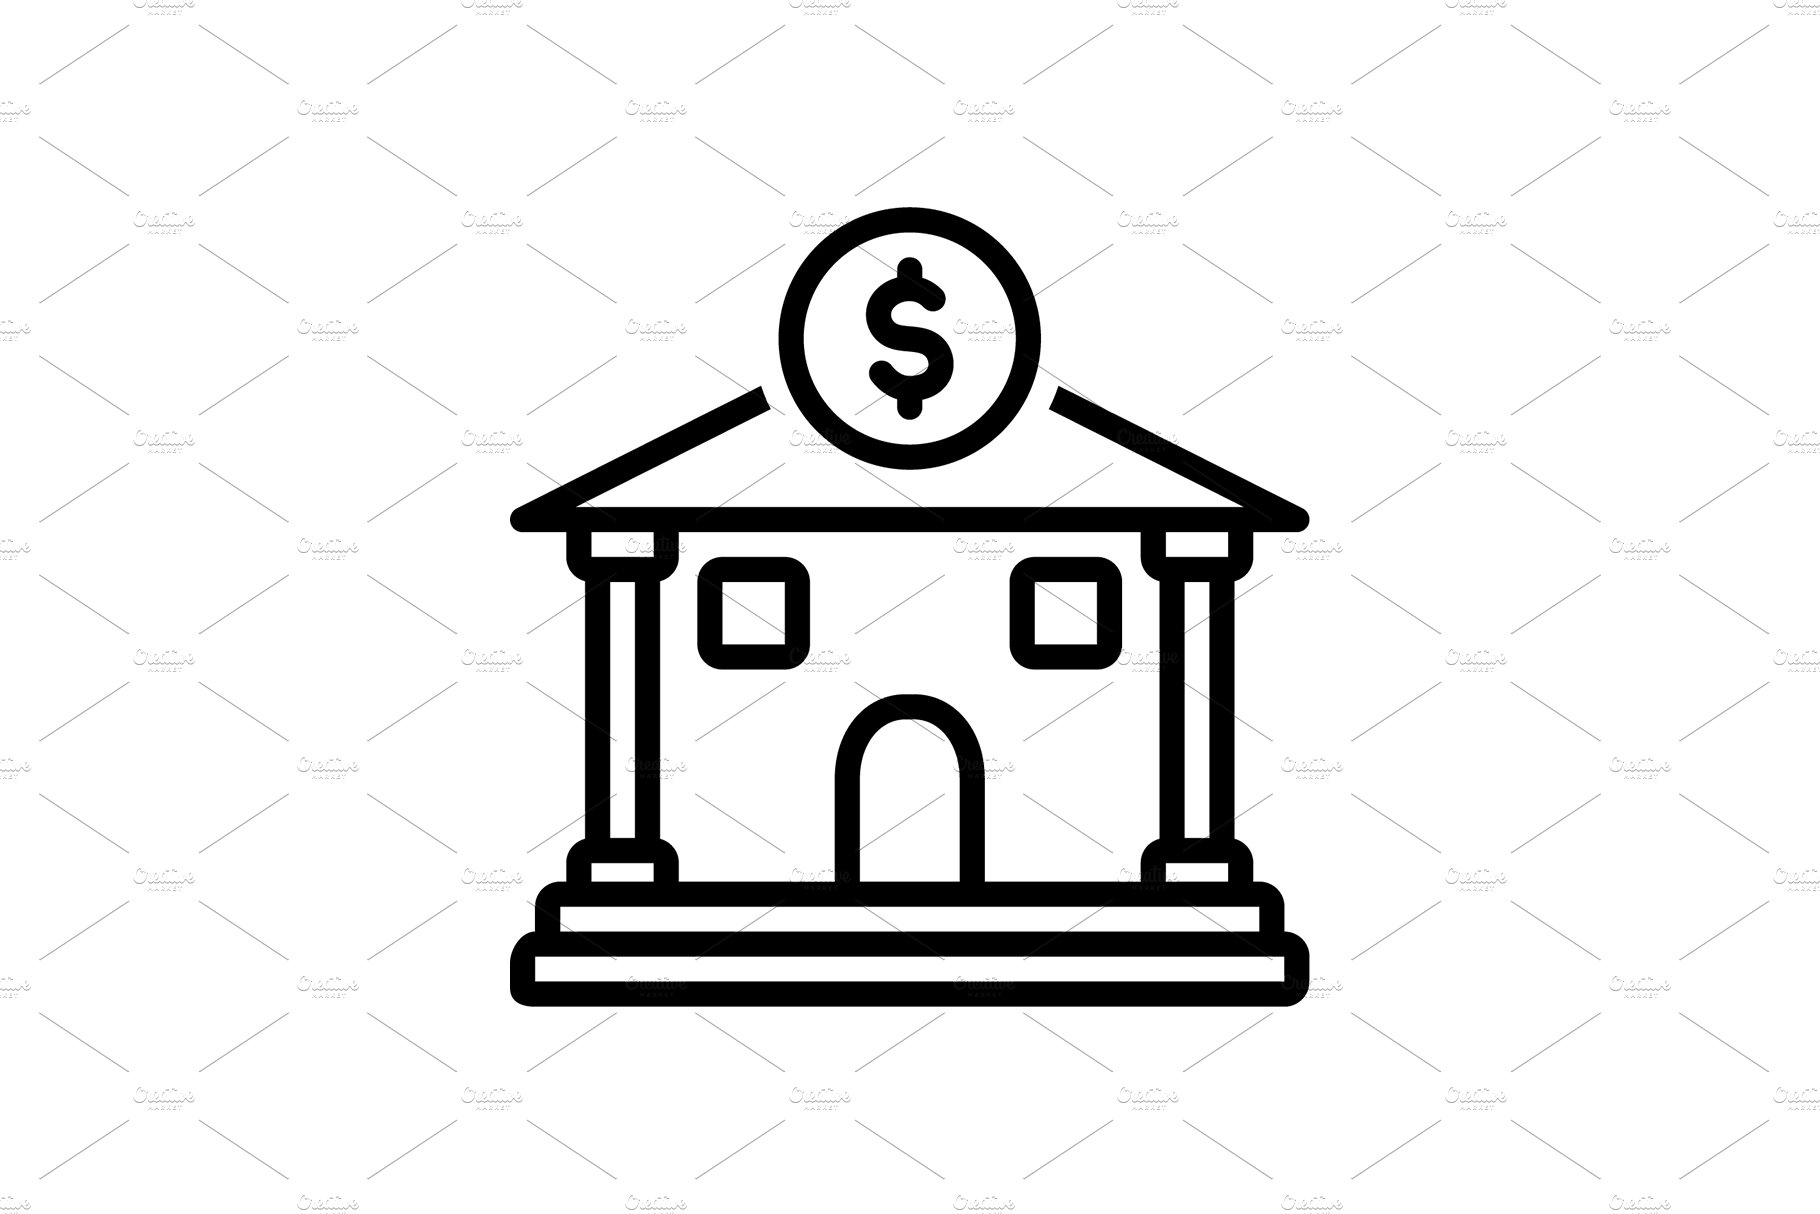 Bank money icon cover image.